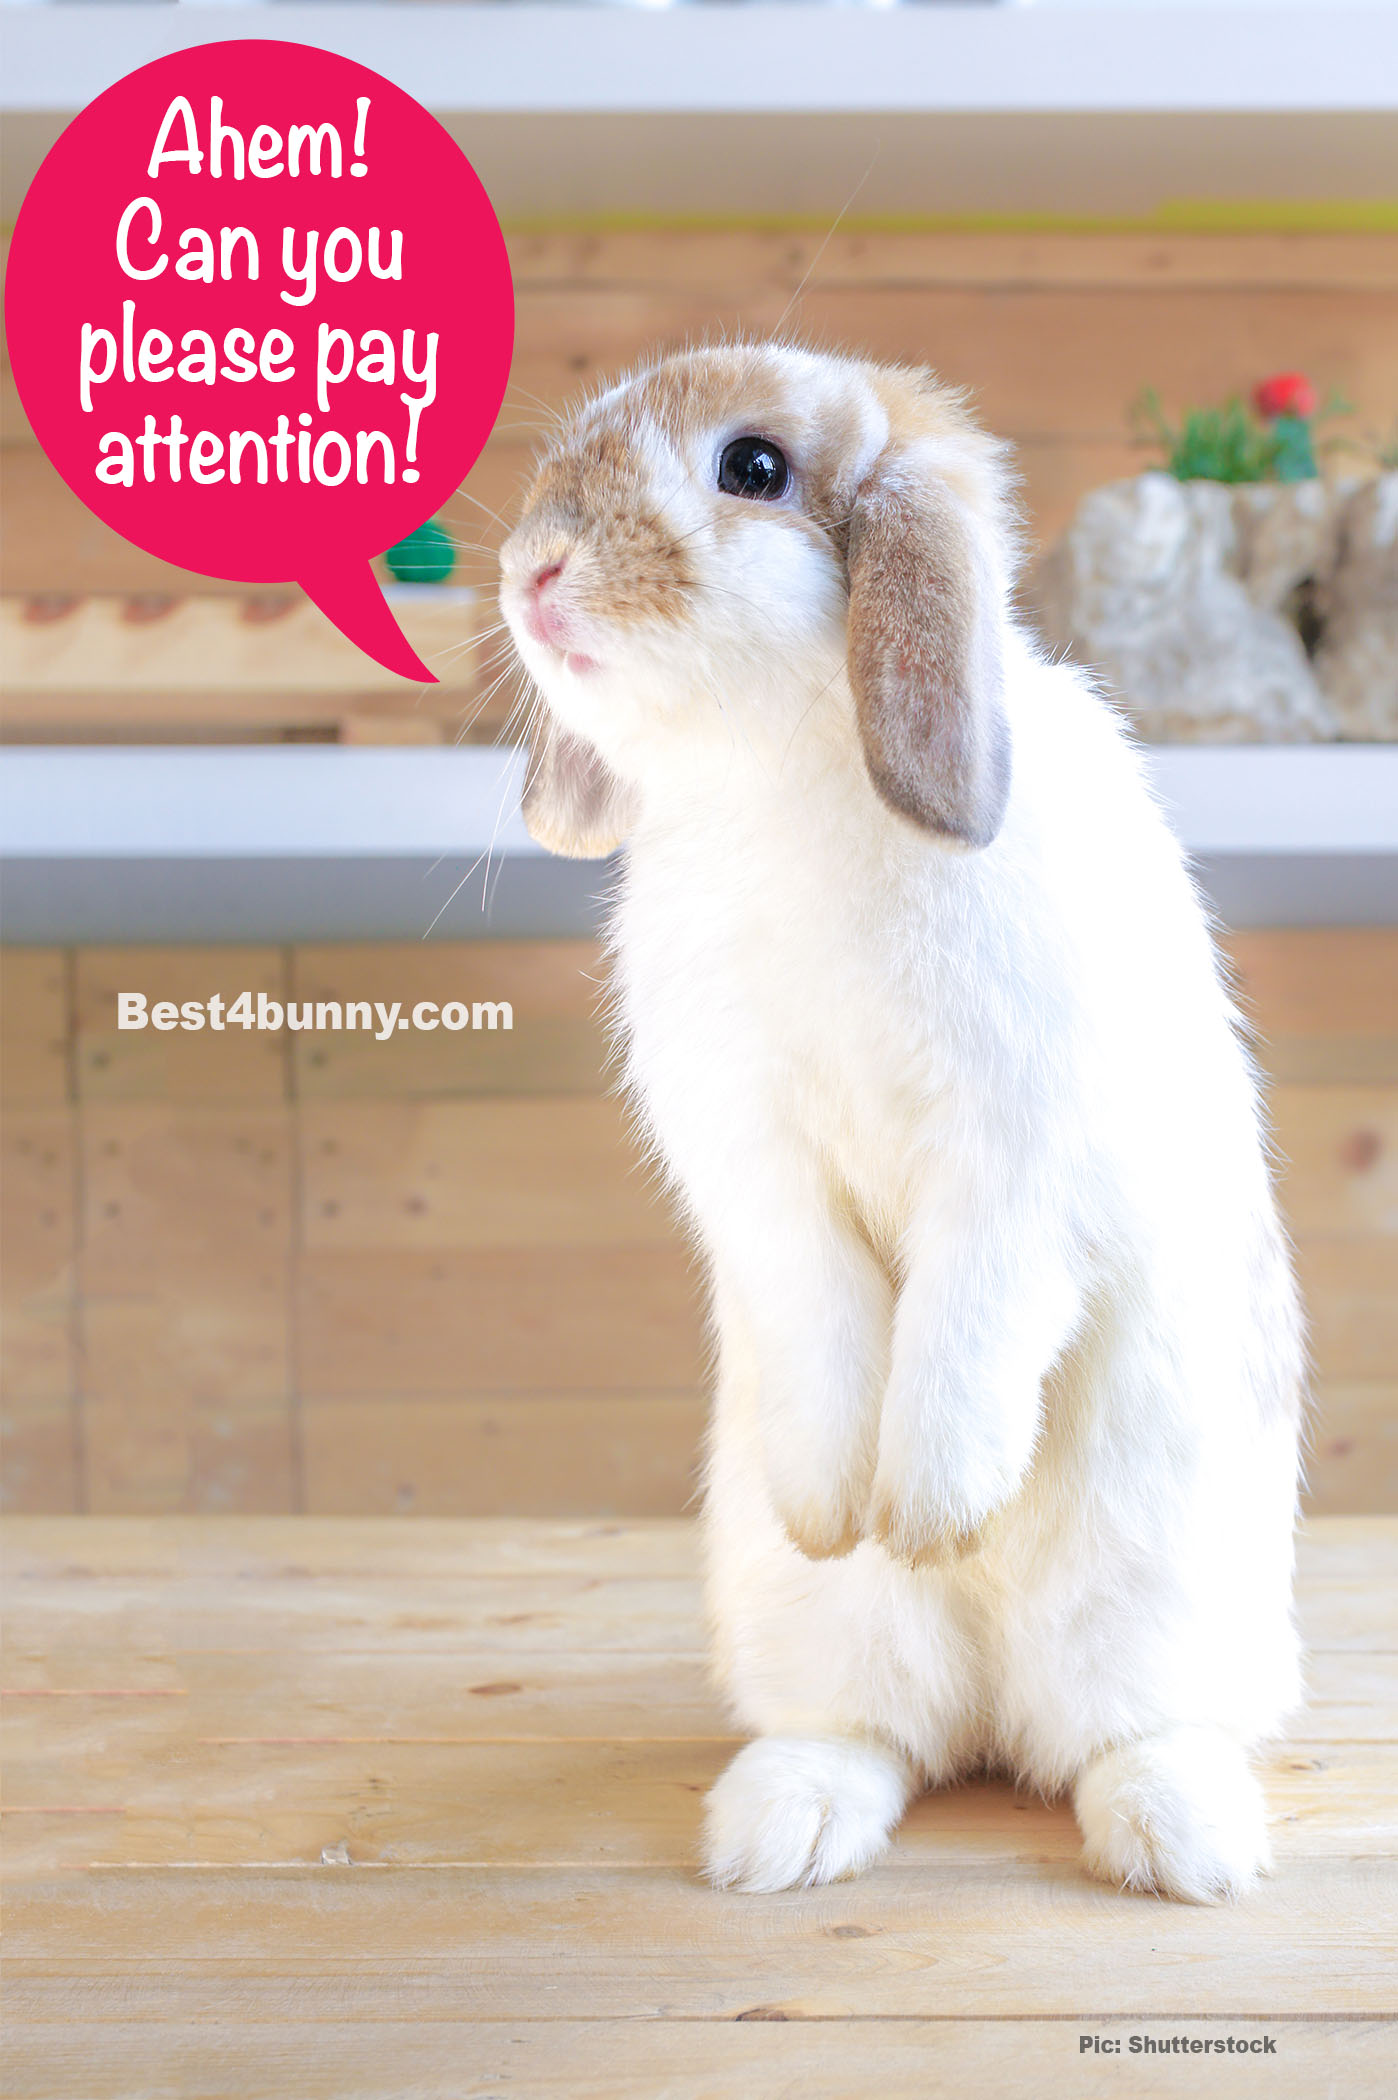 The hilarious things our rabbits do! - Best 4 Bunny